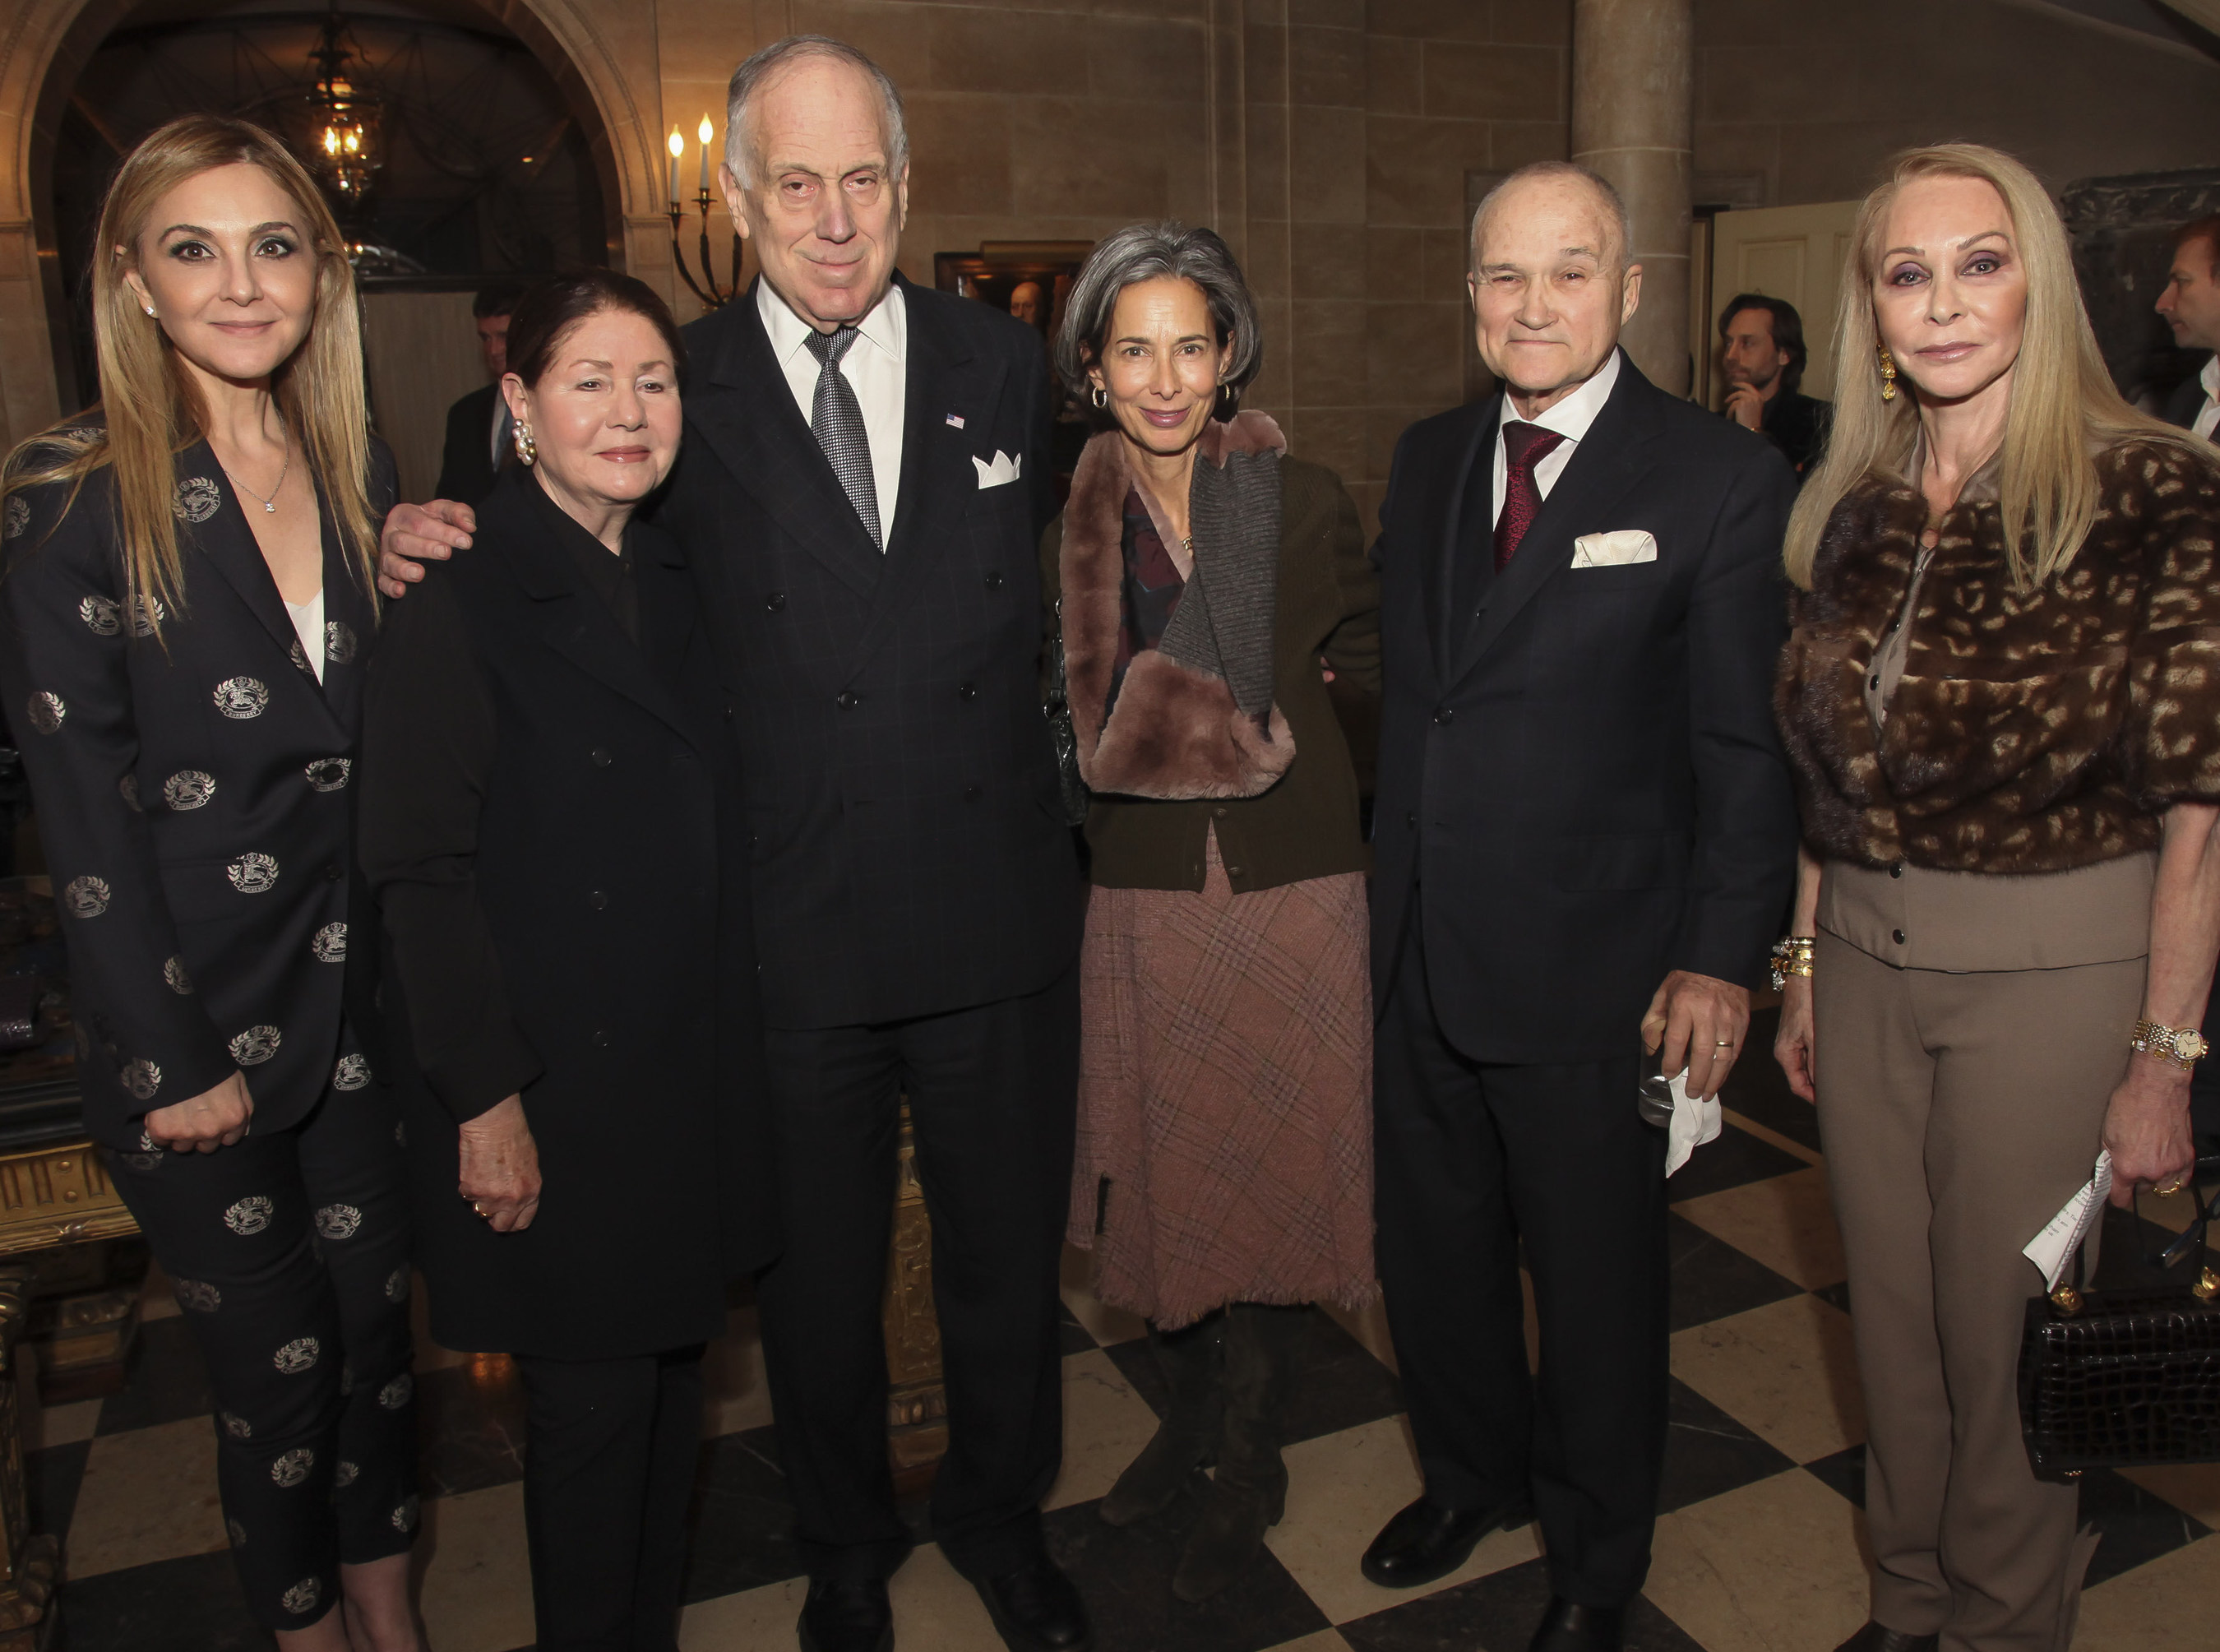 UN Women For Peace Association Hosted a Cocktail Reception Ahead Of International Women's Day